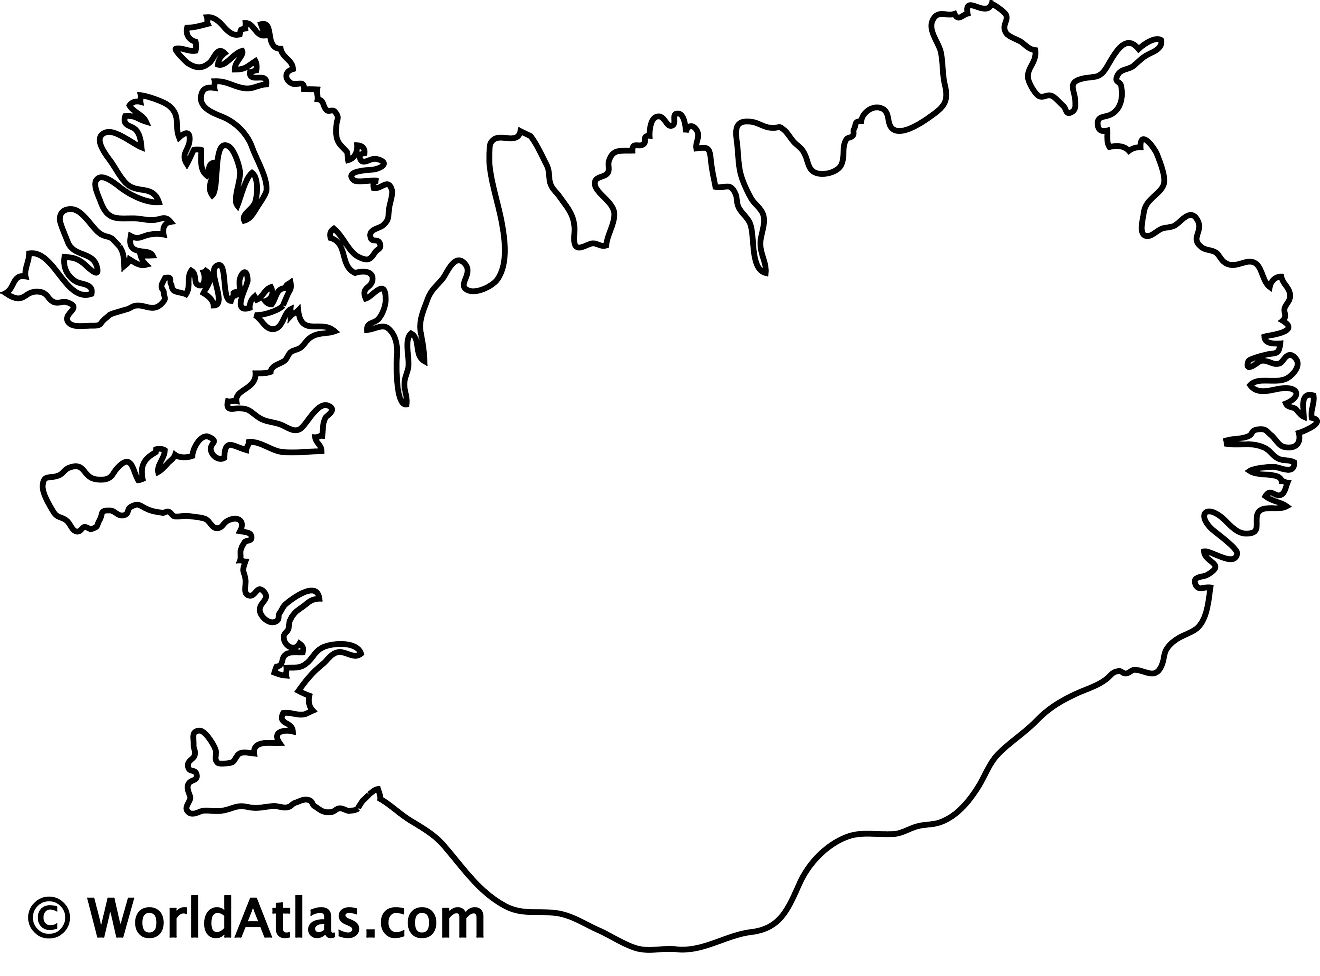 Blank Outline Map of Iceland